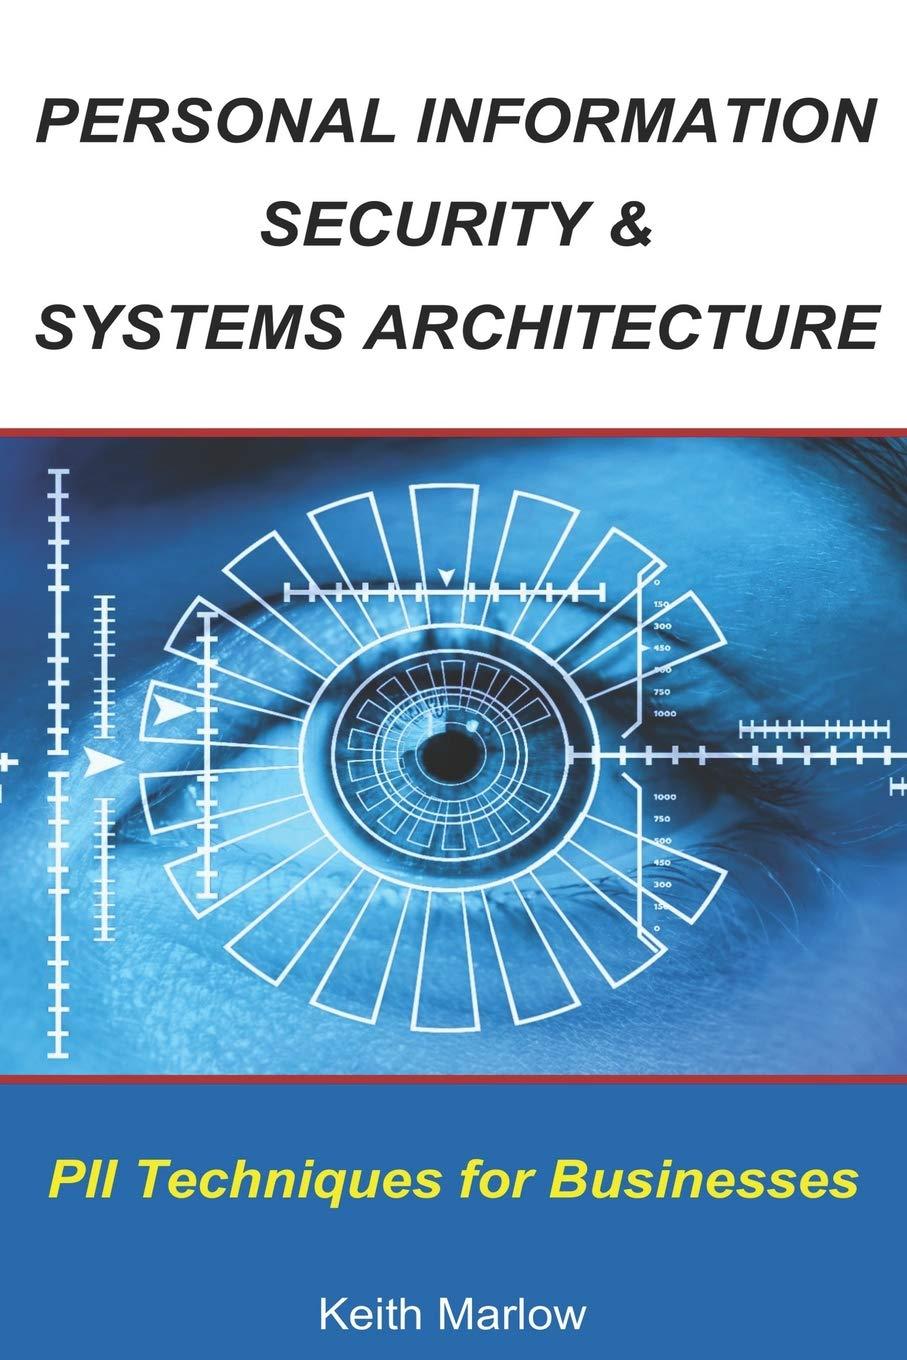 personal information security  systems architecture techniques for pii management in a business 1st edition